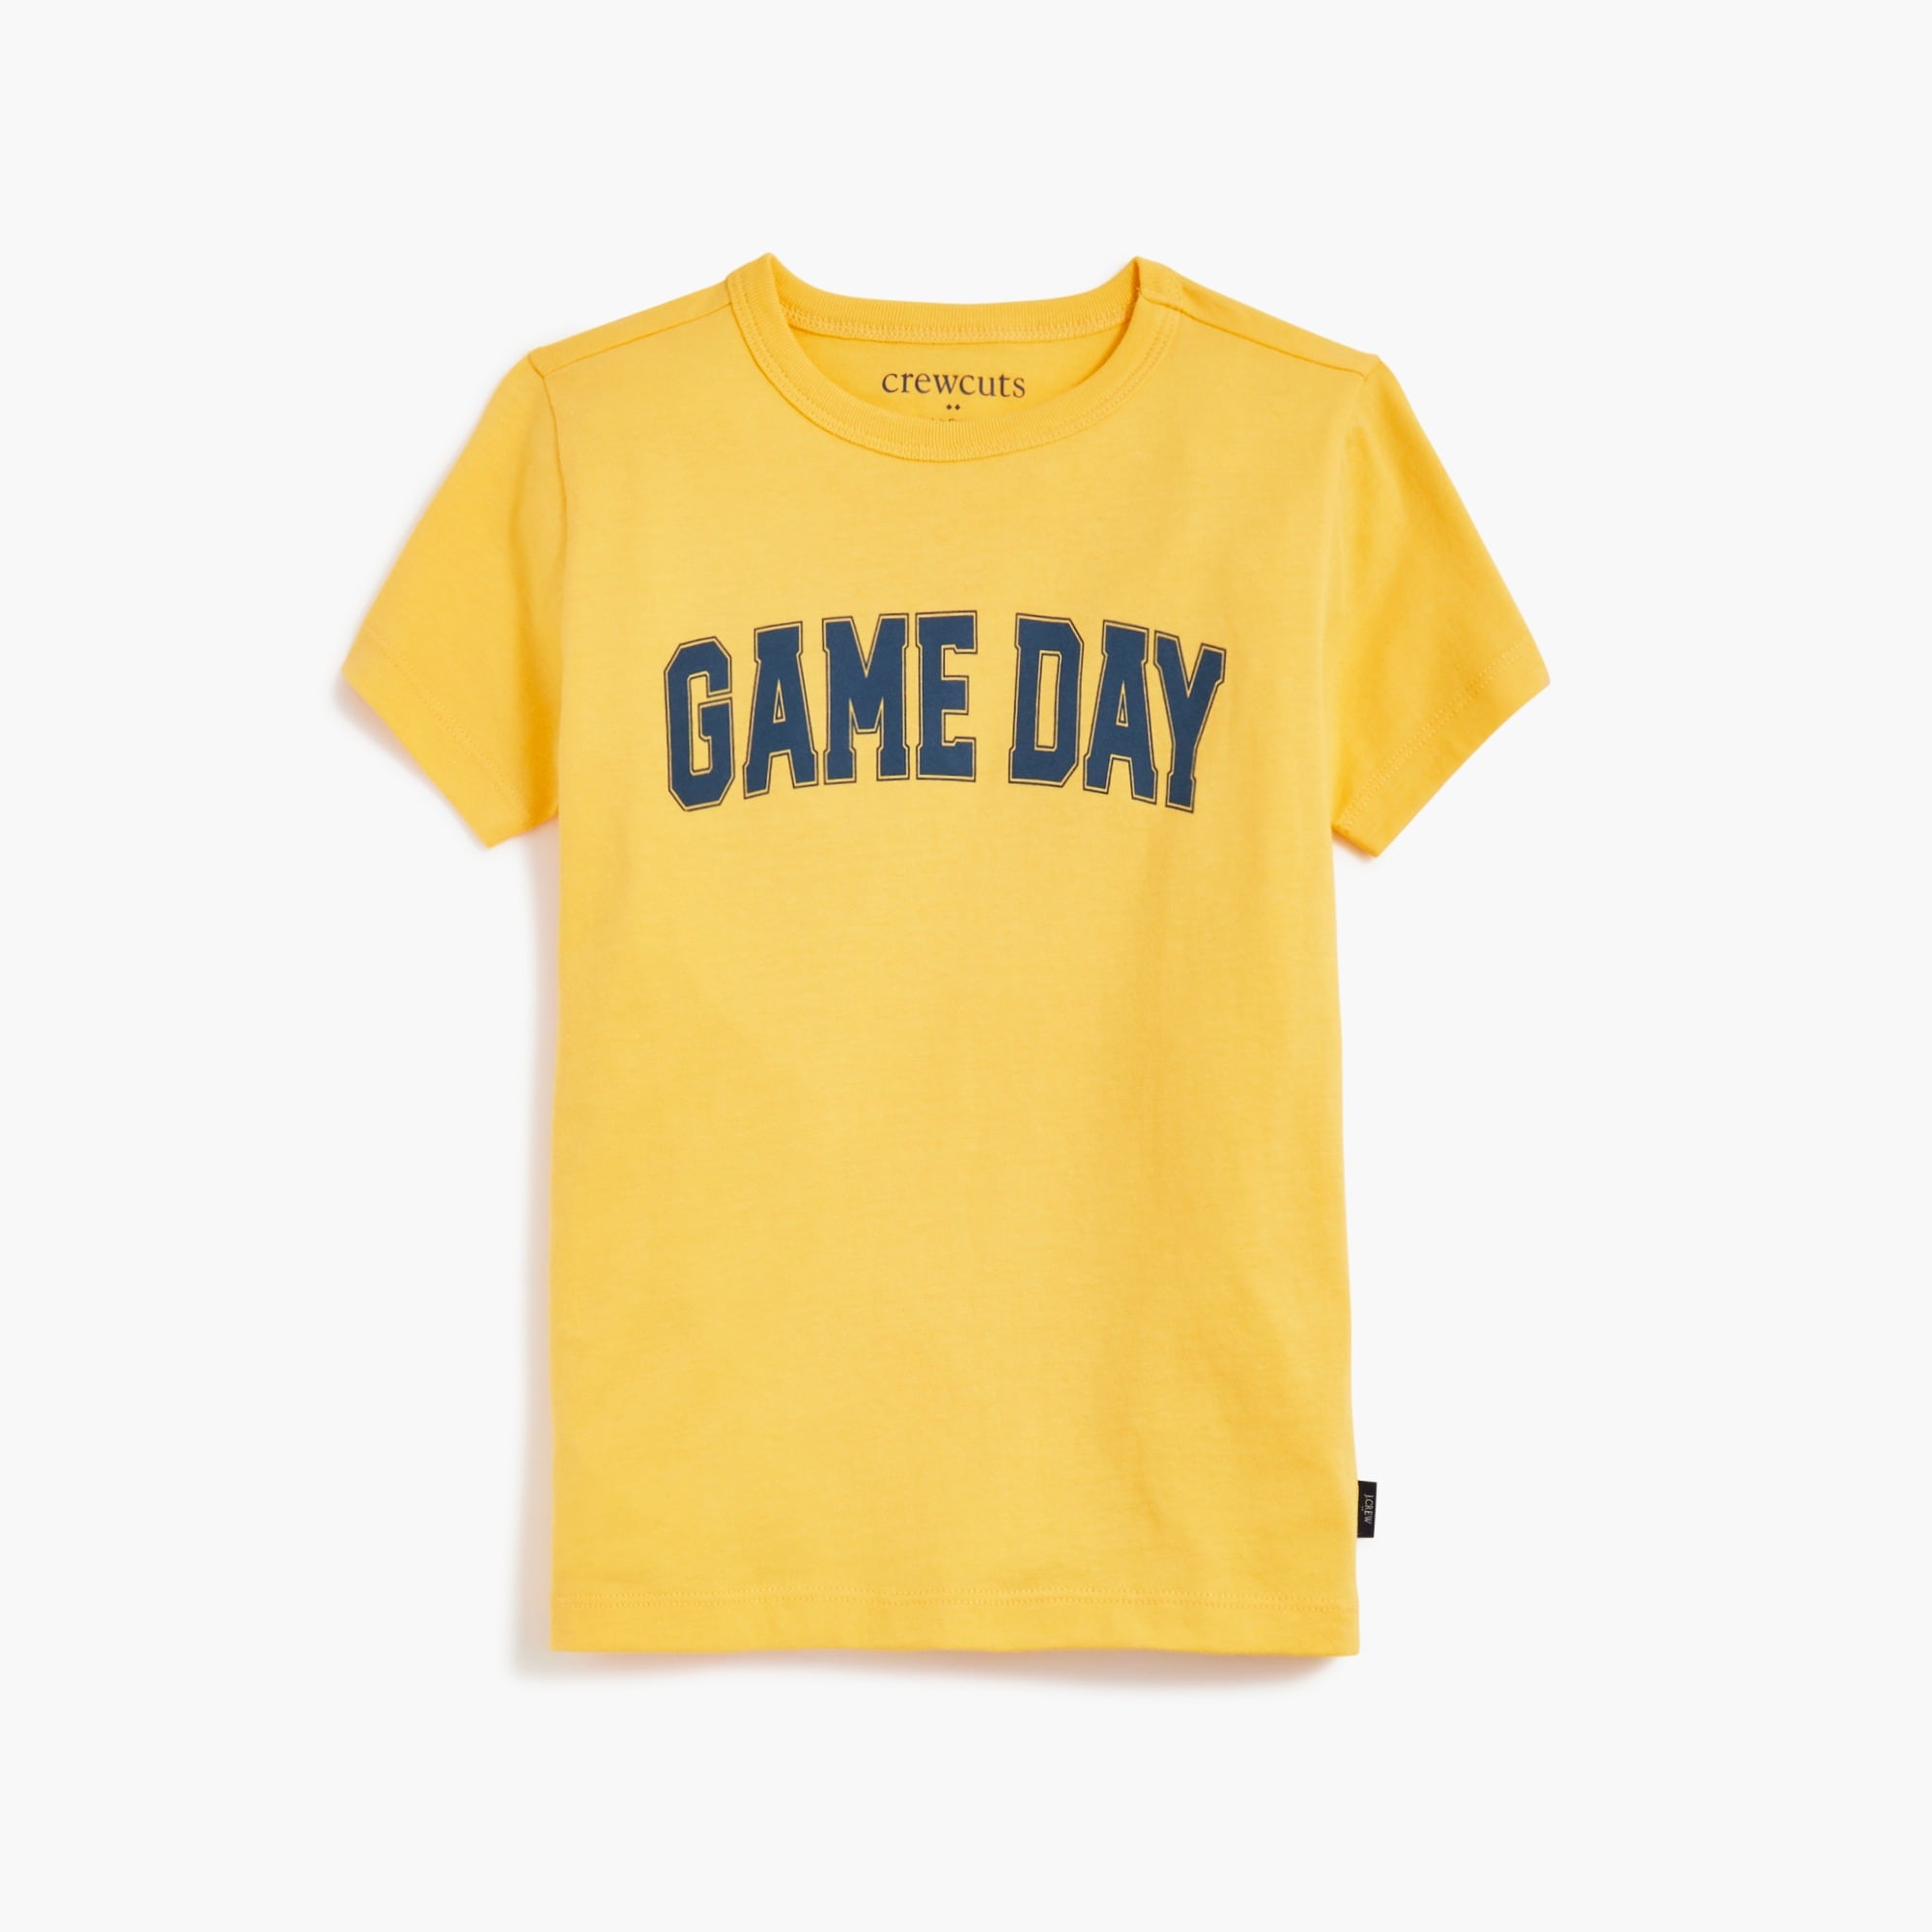 Boys' Game Day graphic tee